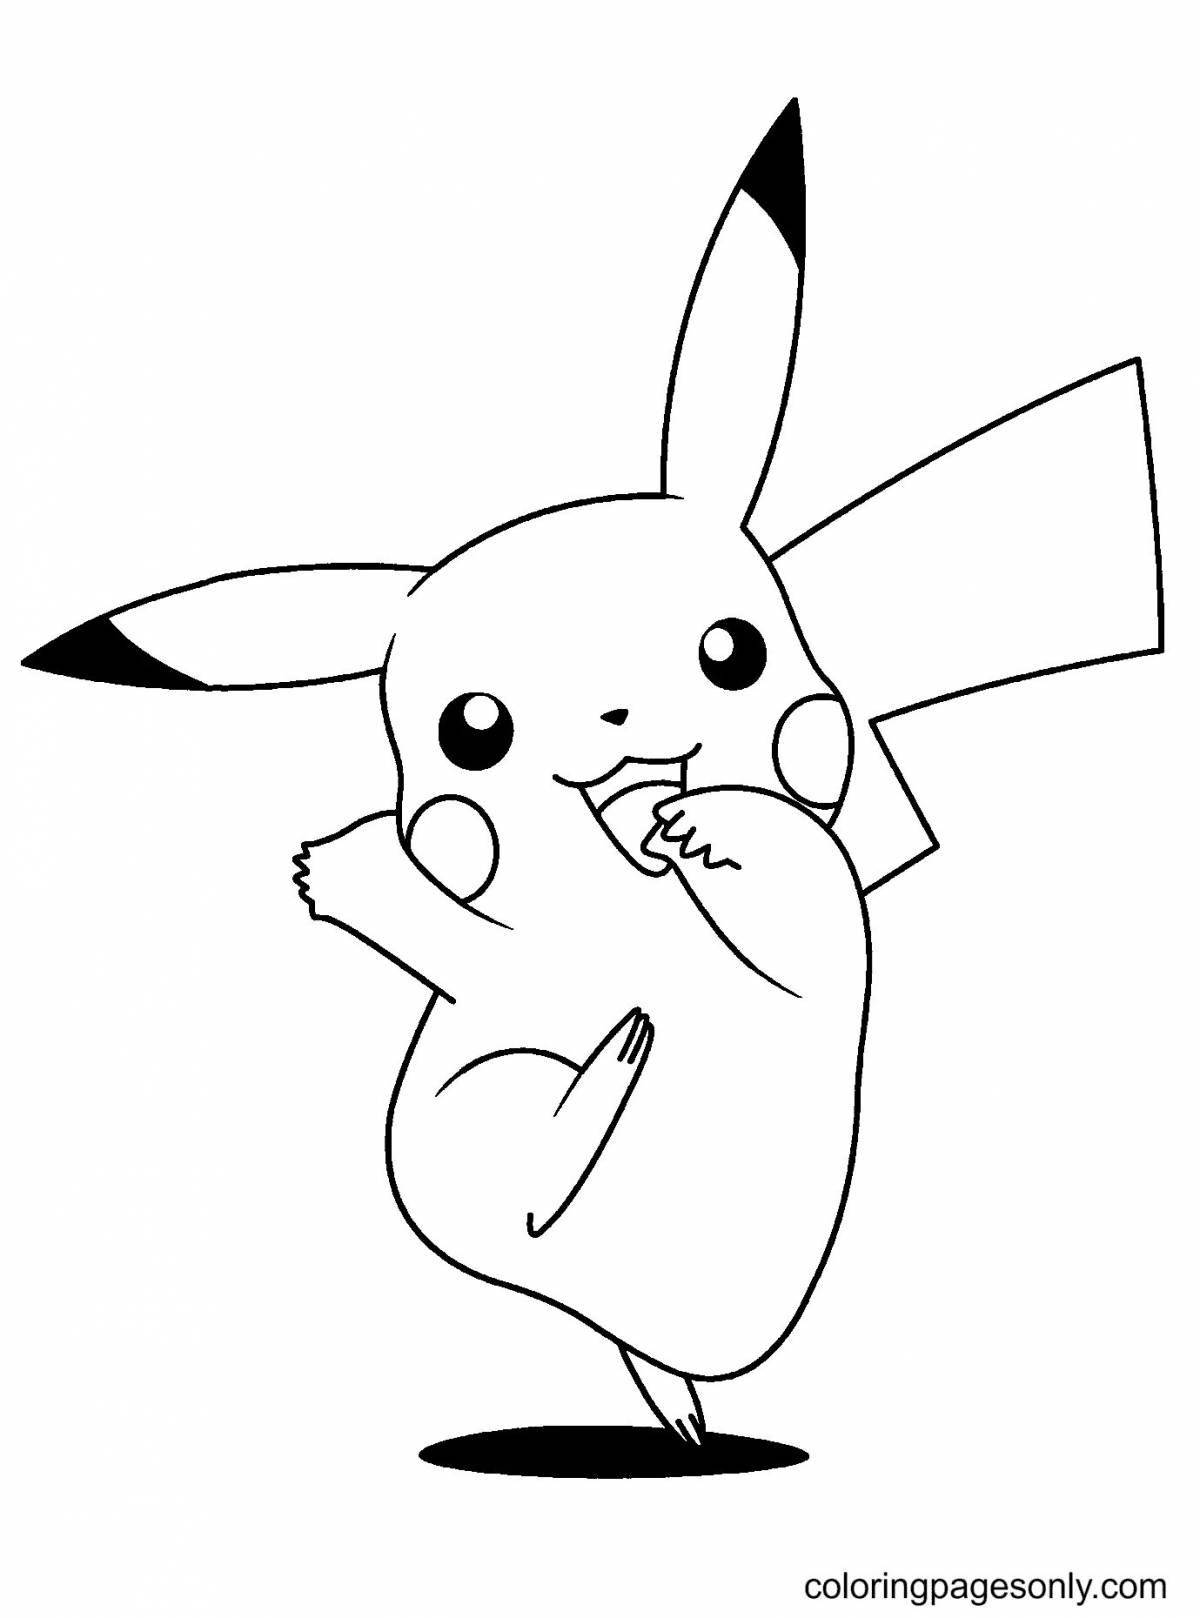 Cute pikachu coloring page